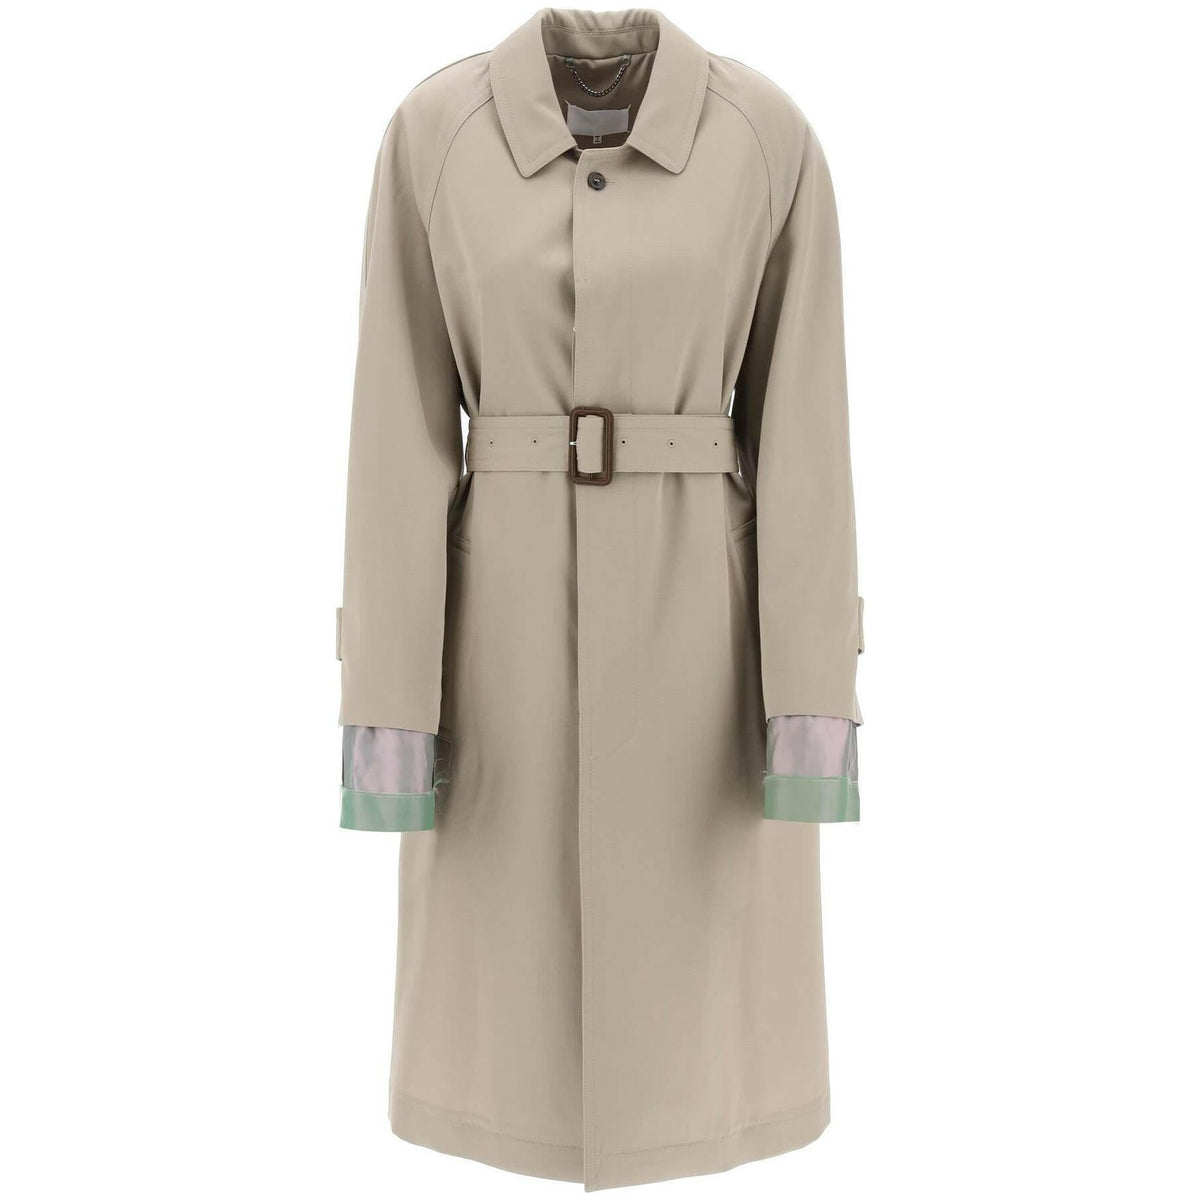 Anonymity of The Lining Trench Coat